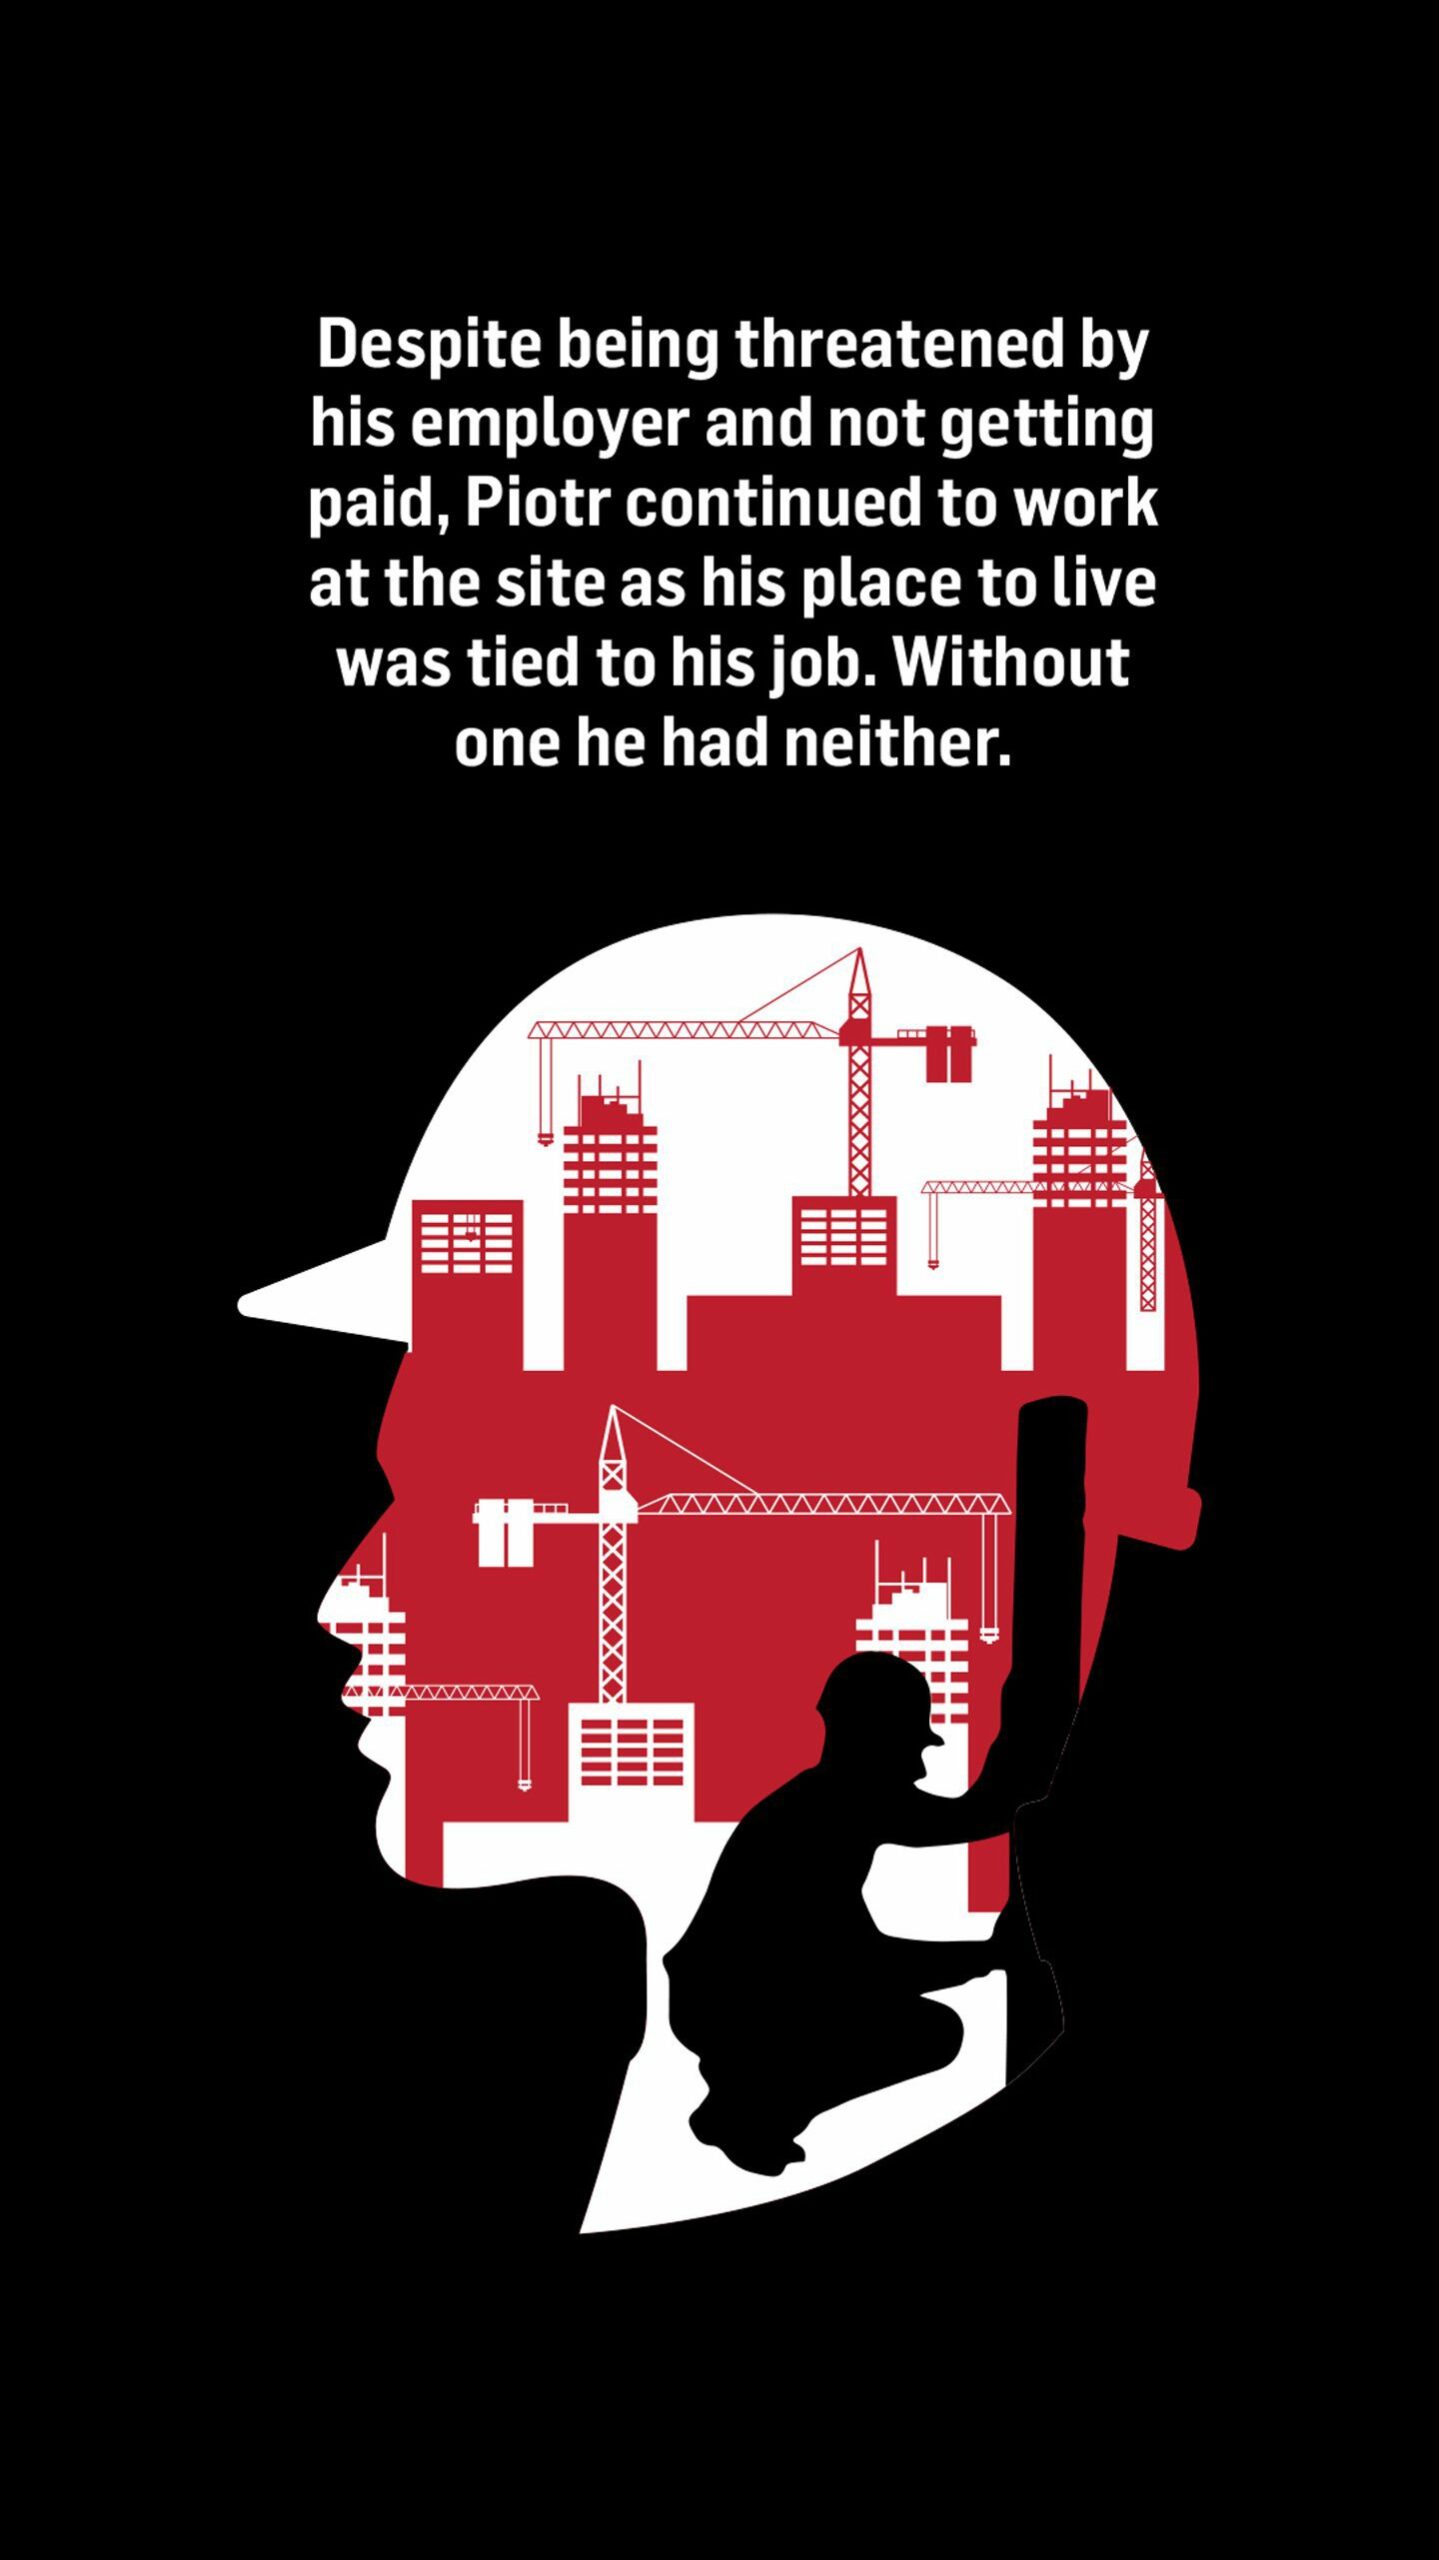 A silhouette of a man wearing a hard at and an image of a person working at a construction site in the background. Text reads: Despite being threatened by his employer and not getting paid, Piotr continued to work at the site as his place to live was tied to his job.